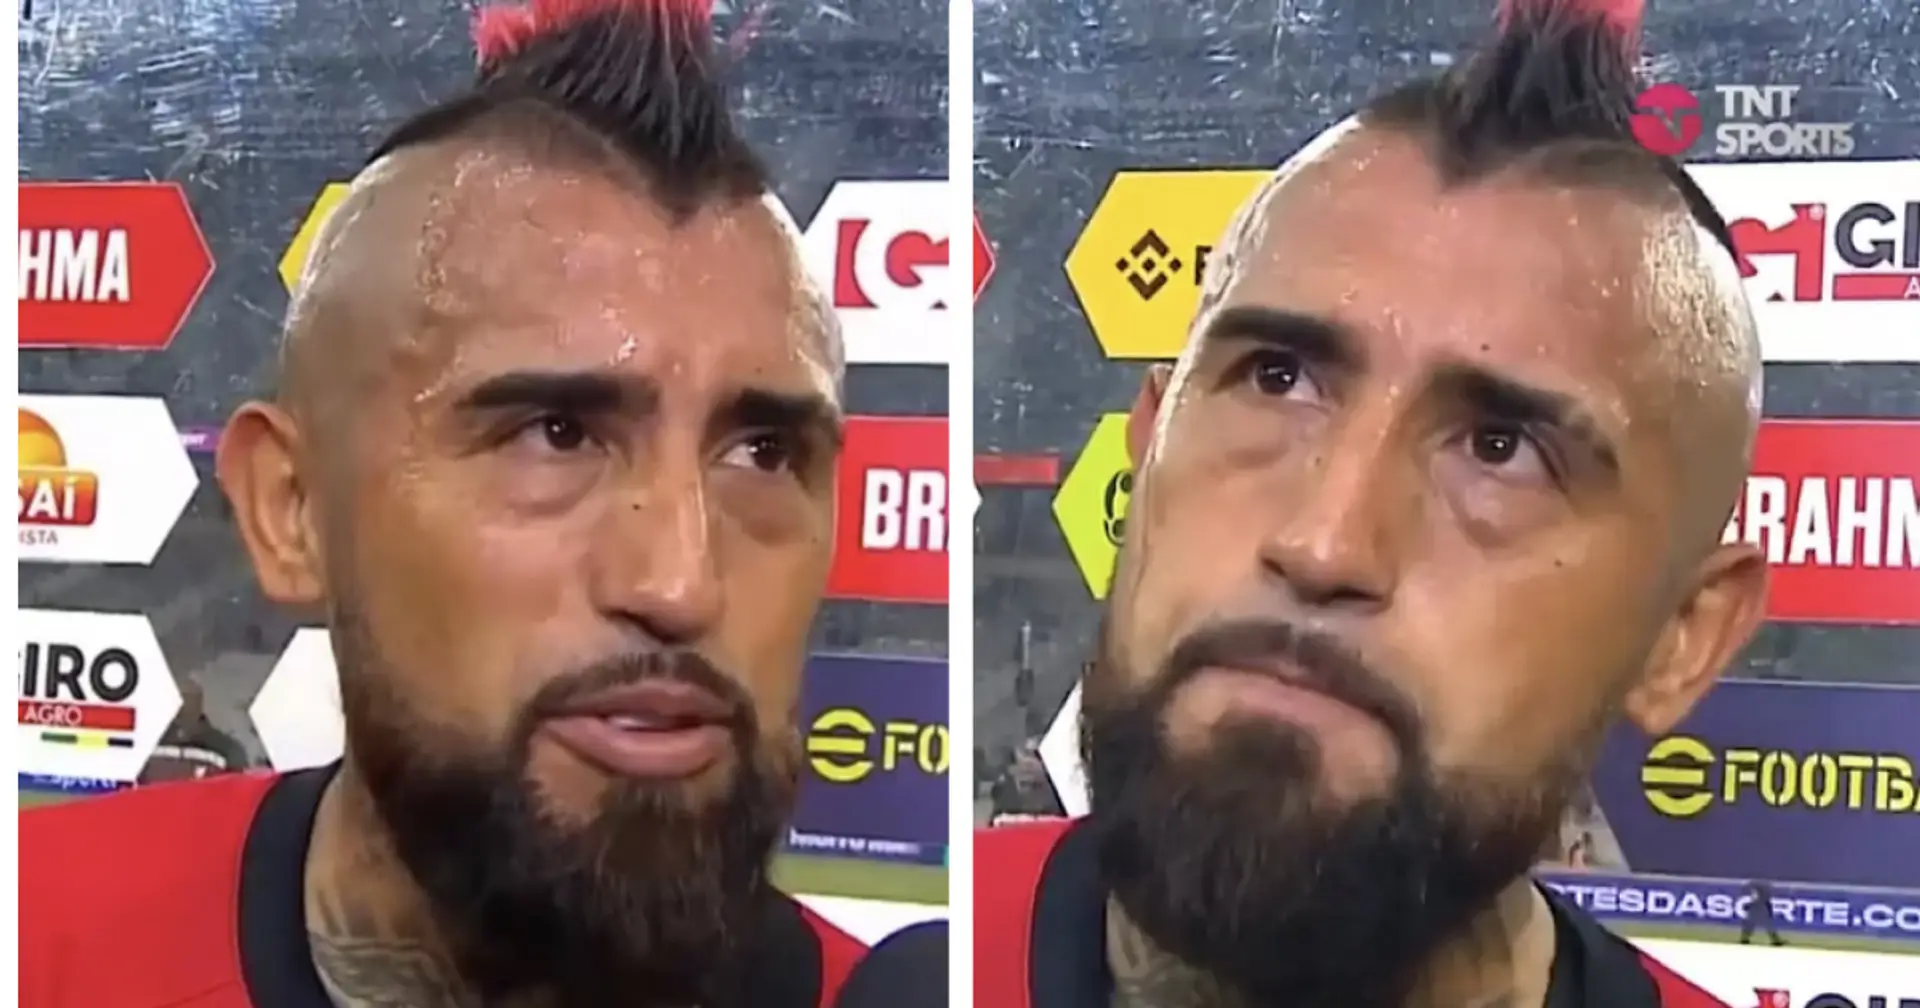 Arturo Vidal calls former coach 'loser' in post-match interview – he coached Messi too